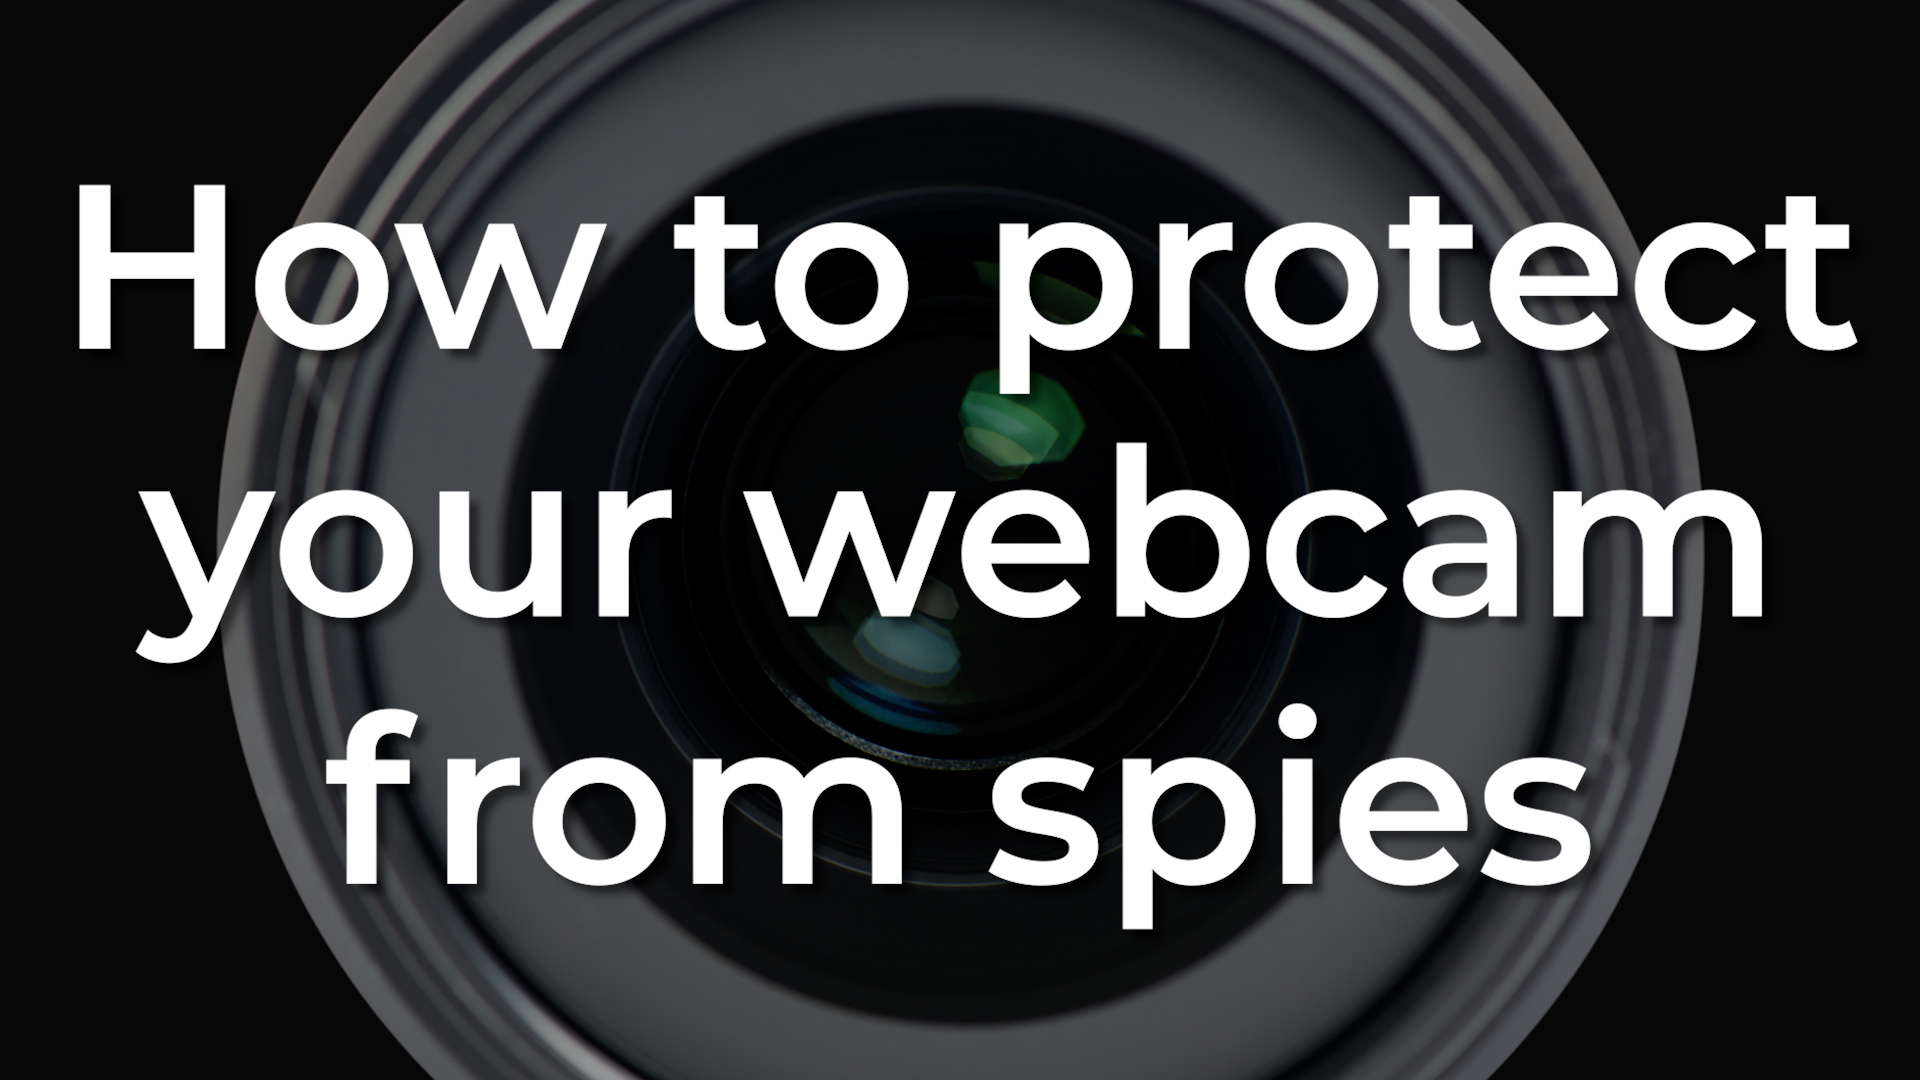 How to protect your webcam from spies